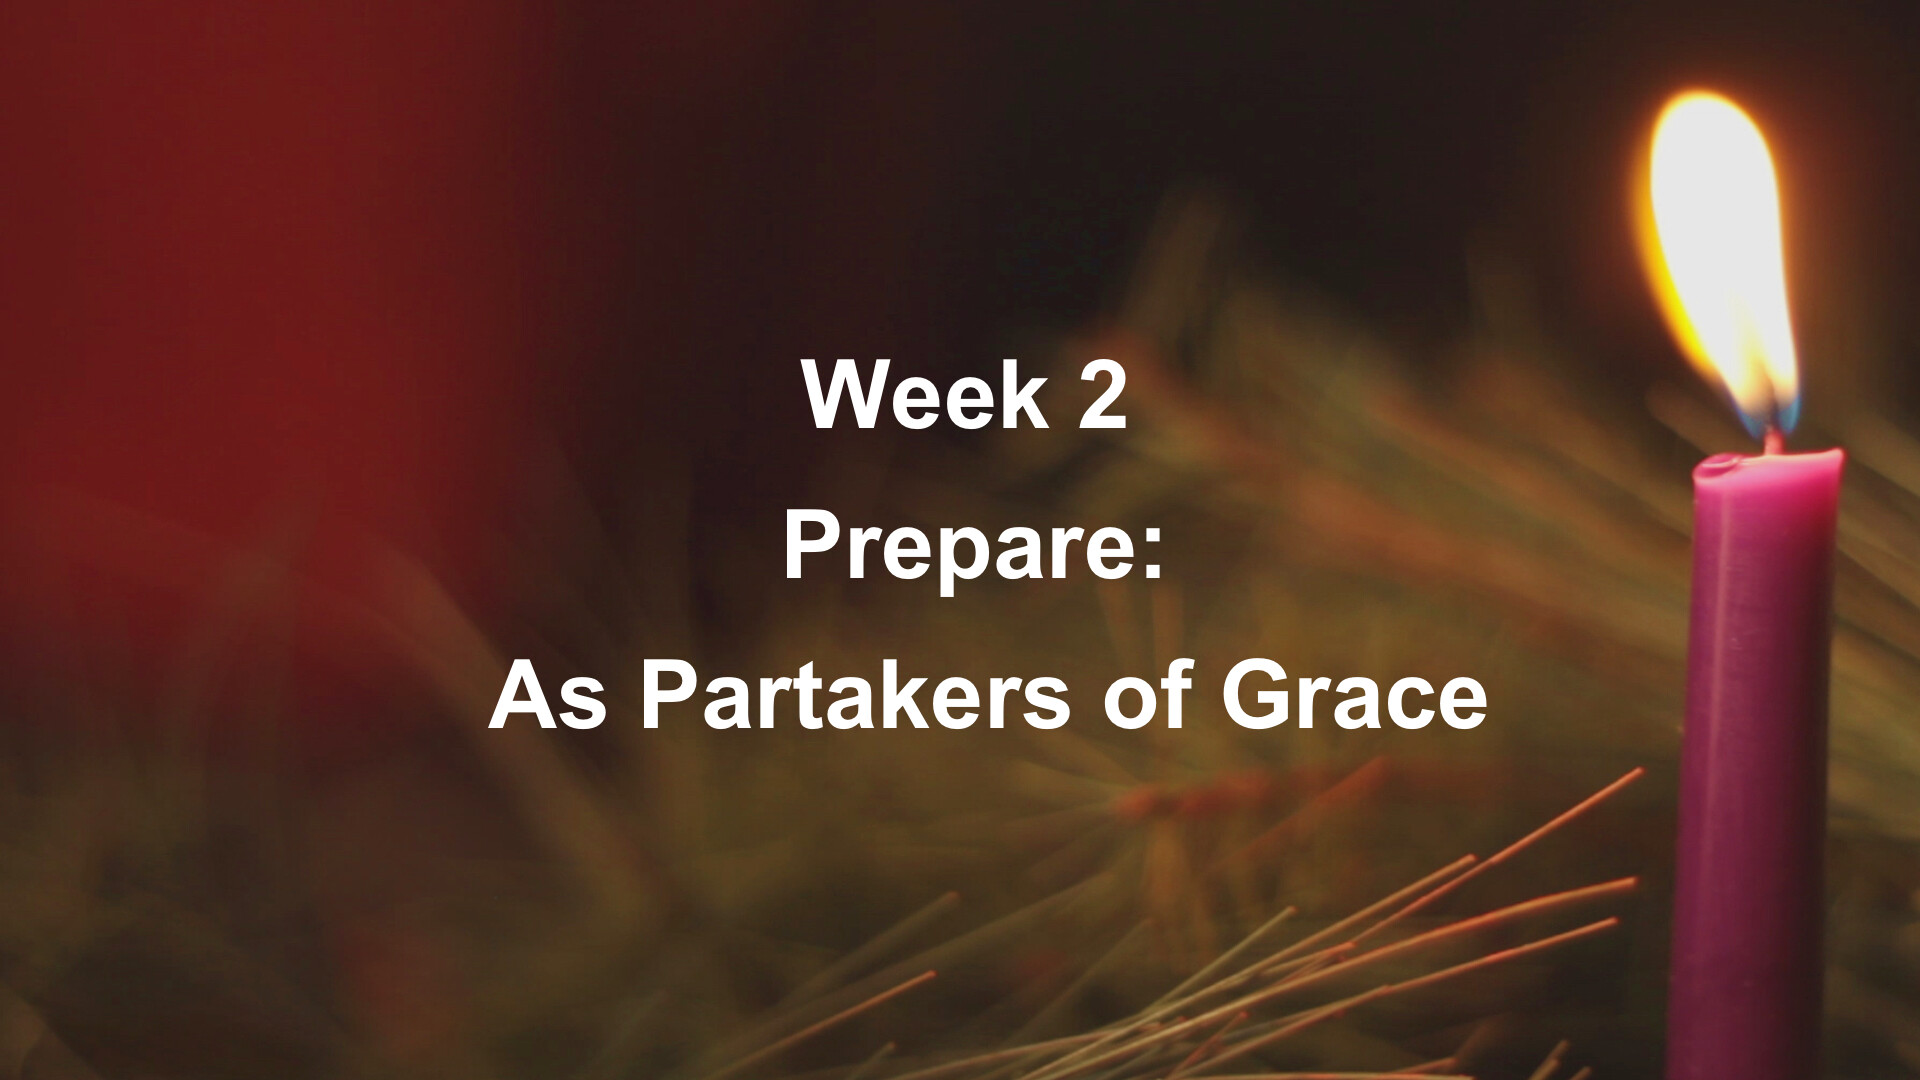 Partakers of Grace